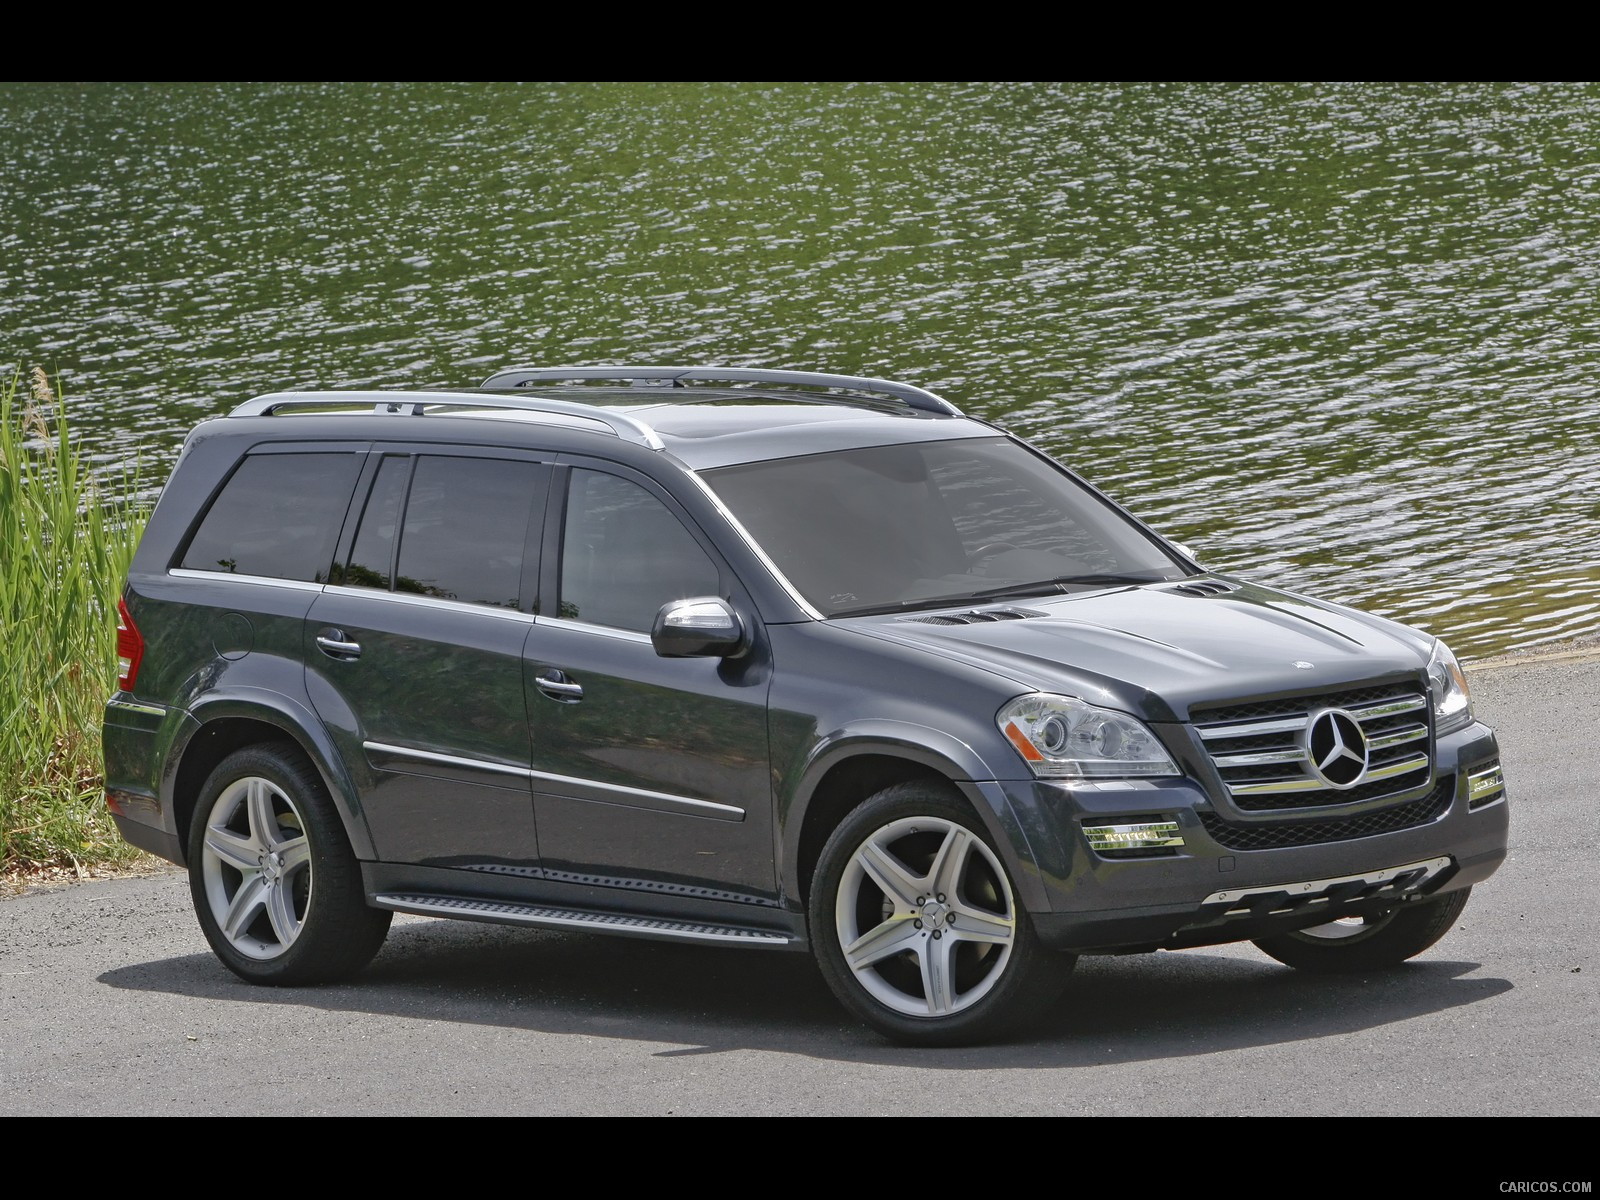 2010 Mercedes-Benz GL550 - Front, #54 of 112